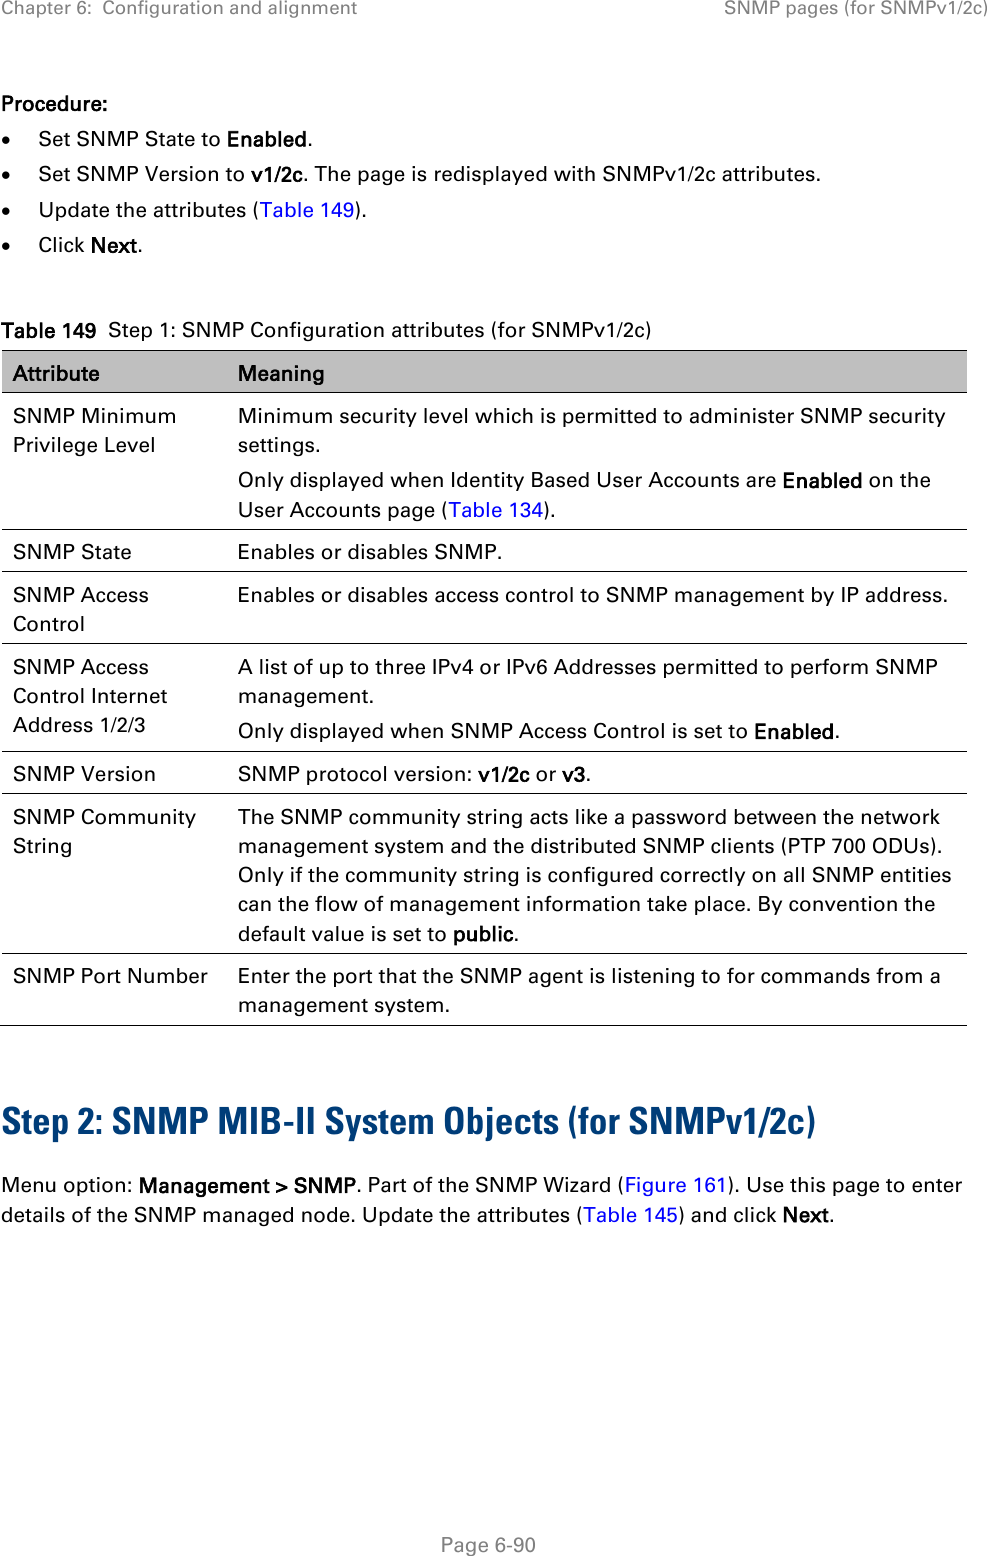 Chapter 6:  Configuration and alignment SNMP pages (for SNMPv1/2c)  Procedure: • Set SNMP State to Enabled. • Set SNMP Version to v1/2c. The page is redisplayed with SNMPv1/2c attributes. • Update the attributes (Table 149). • Click Next.  Table 149  Step 1: SNMP Configuration attributes (for SNMPv1/2c) Attribute Meaning SNMP Minimum Privilege Level Minimum security level which is permitted to administer SNMP security settings. Only displayed when Identity Based User Accounts are Enabled on the User Accounts page (Table 134). SNMP State Enables or disables SNMP. SNMP Access Control Enables or disables access control to SNMP management by IP address. SNMP Access Control Internet Address 1/2/3 A list of up to three IPv4 or IPv6 Addresses permitted to perform SNMP management. Only displayed when SNMP Access Control is set to Enabled. SNMP Version SNMP protocol version: v1/2c or v3. SNMP Community String The SNMP community string acts like a password between the network management system and the distributed SNMP clients (PTP 700 ODUs). Only if the community string is configured correctly on all SNMP entities can the flow of management information take place. By convention the default value is set to public. SNMP Port Number Enter the port that the SNMP agent is listening to for commands from a management system.  Step 2: SNMP MIB-II System Objects (for SNMPv1/2c) Menu option: Management &gt; SNMP. Part of the SNMP Wizard (Figure 161). Use this page to enter details of the SNMP managed node. Update the attributes (Table 145) and click Next.   Page 6-90 